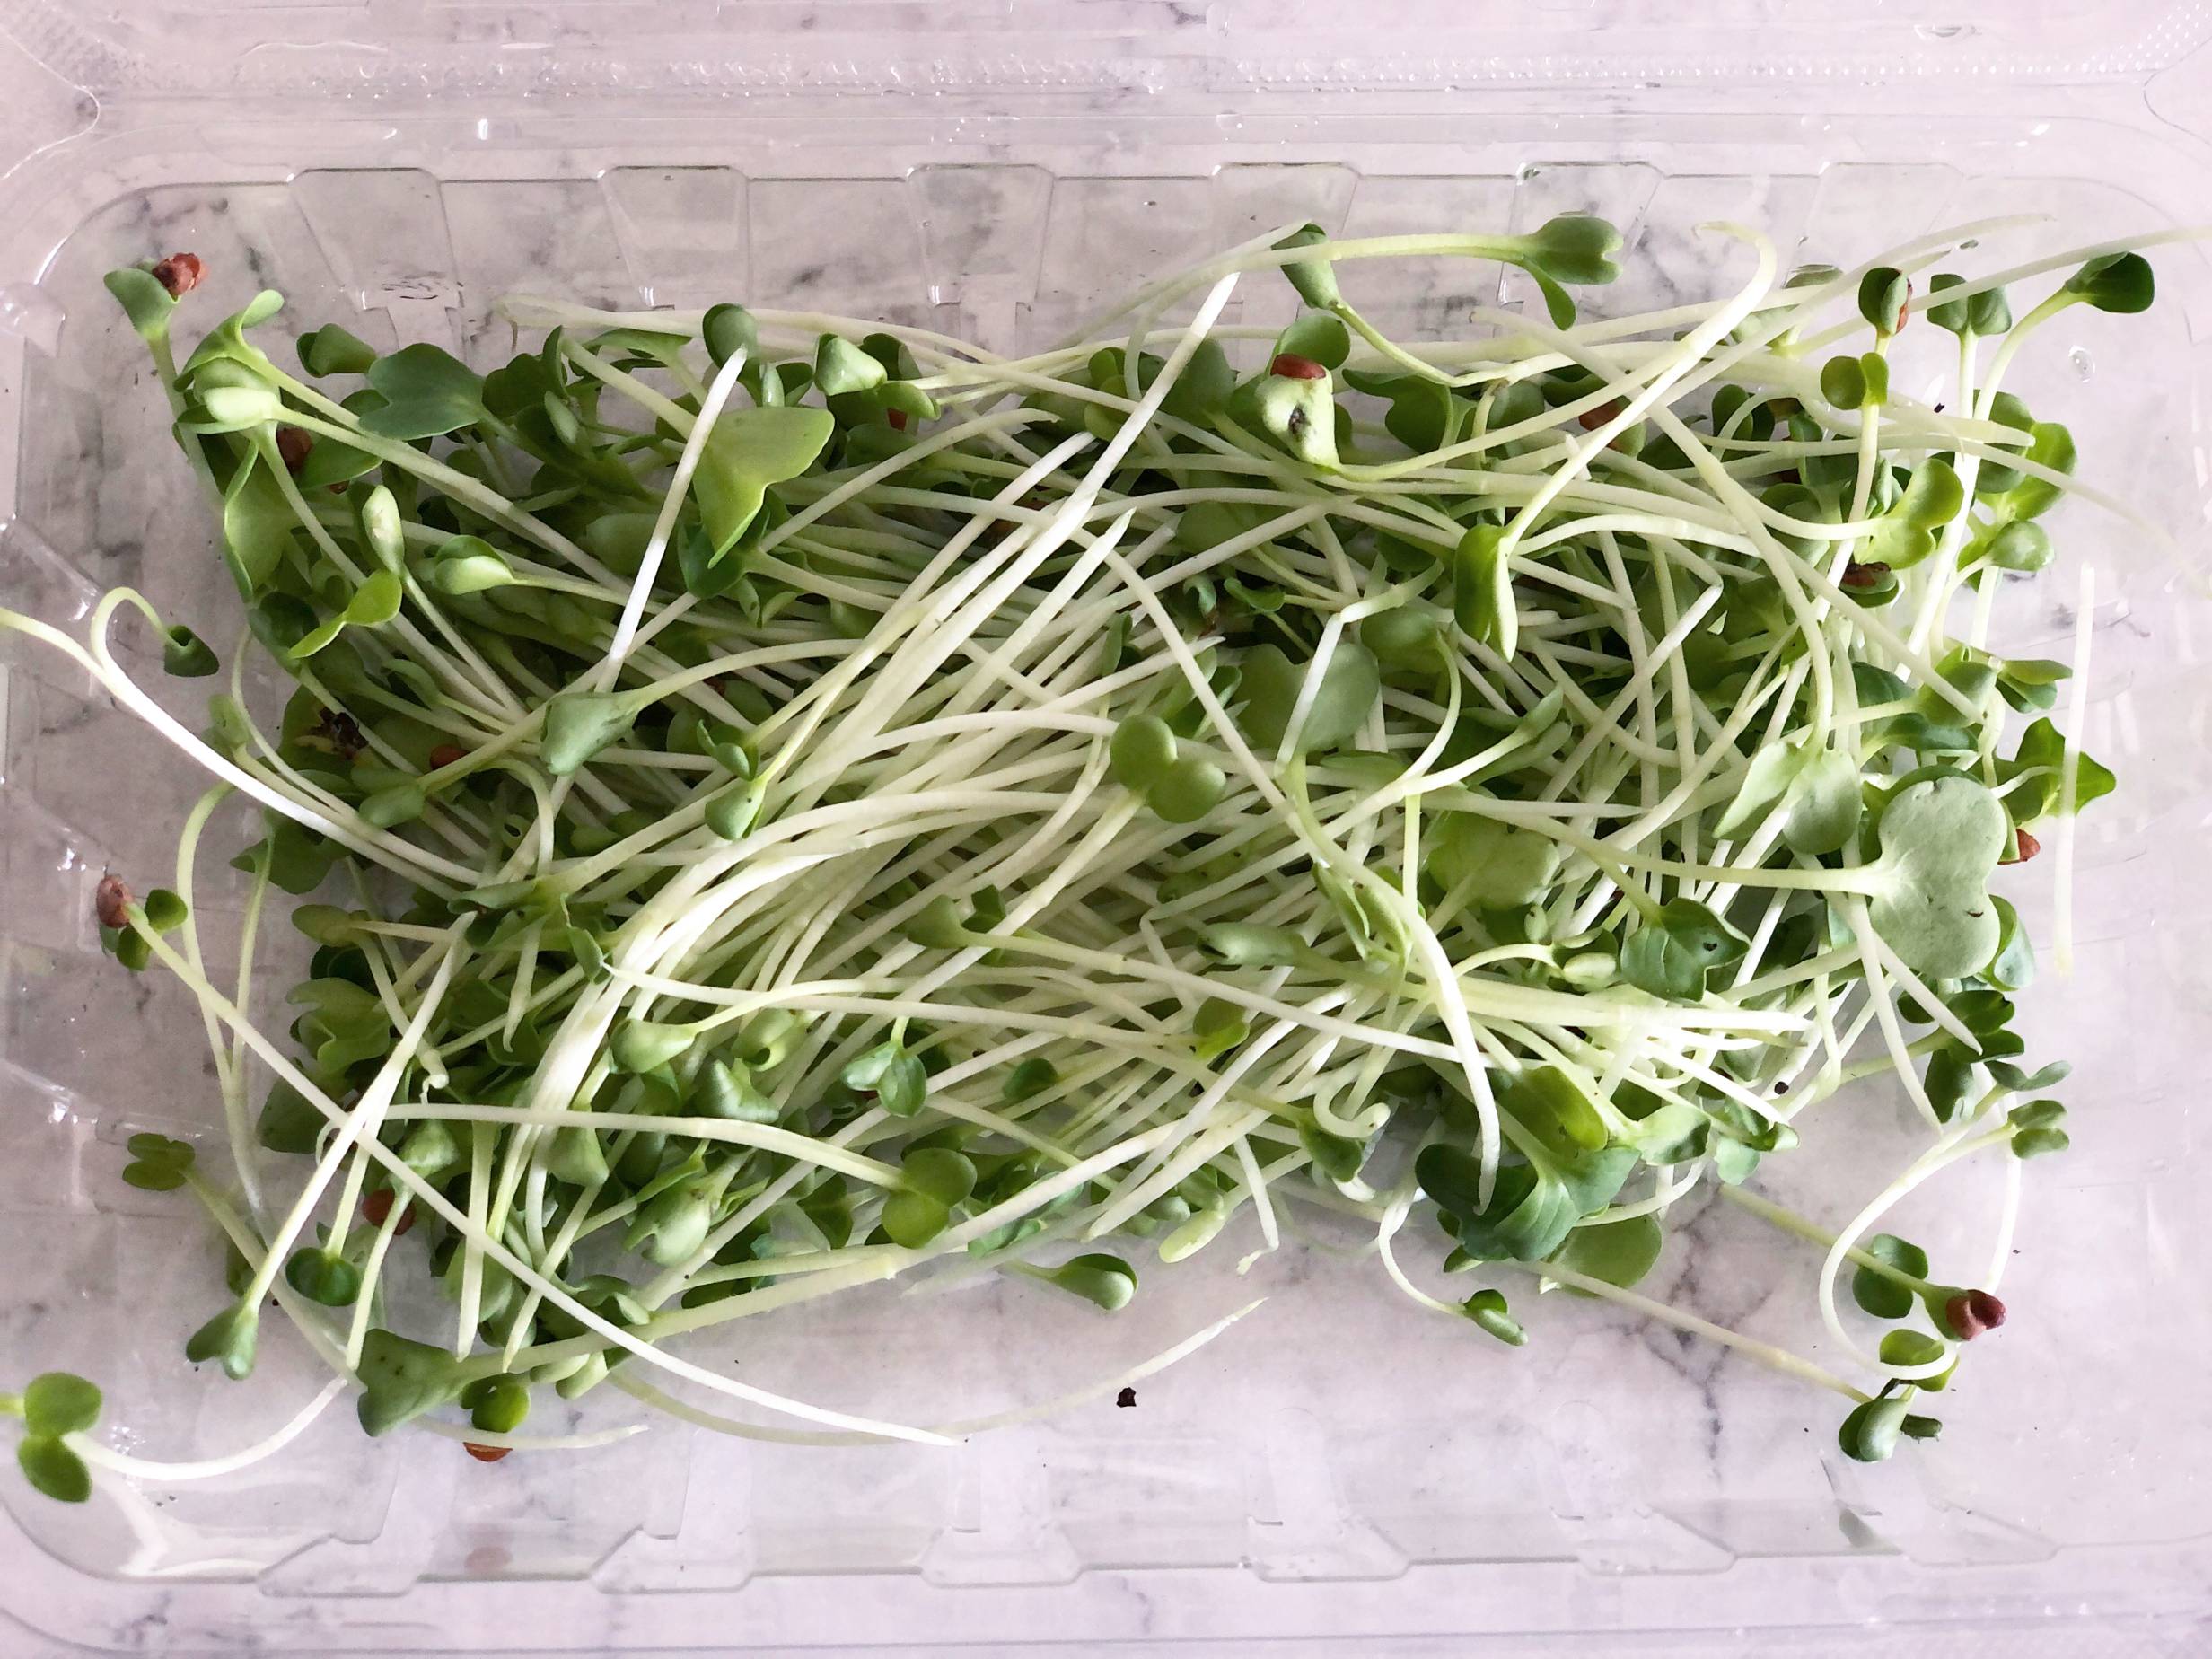 Lots of microgreens are assembled in a plastic to-go container. Photo by Alyssa Buckley.